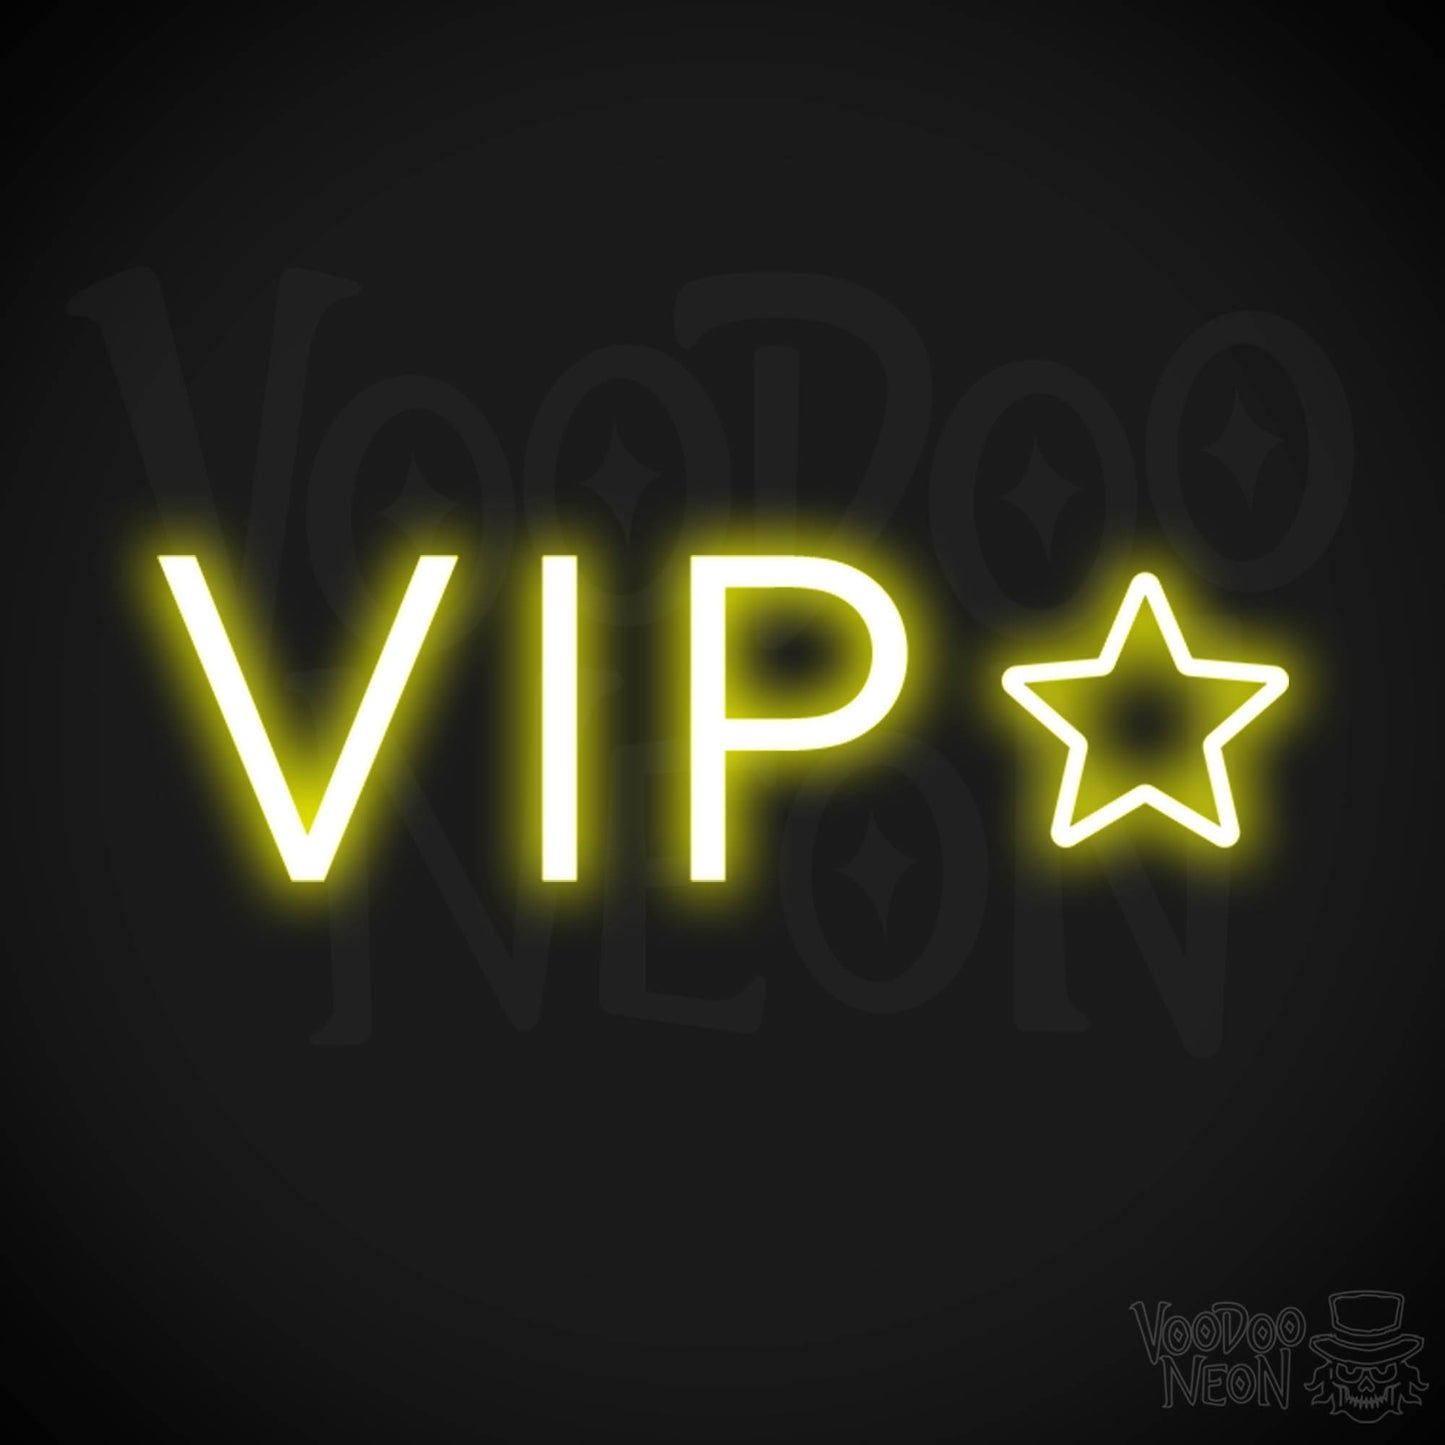 VIP Neon Sign - Neon VIP Sign - VIP LED Sign - Color Yellow